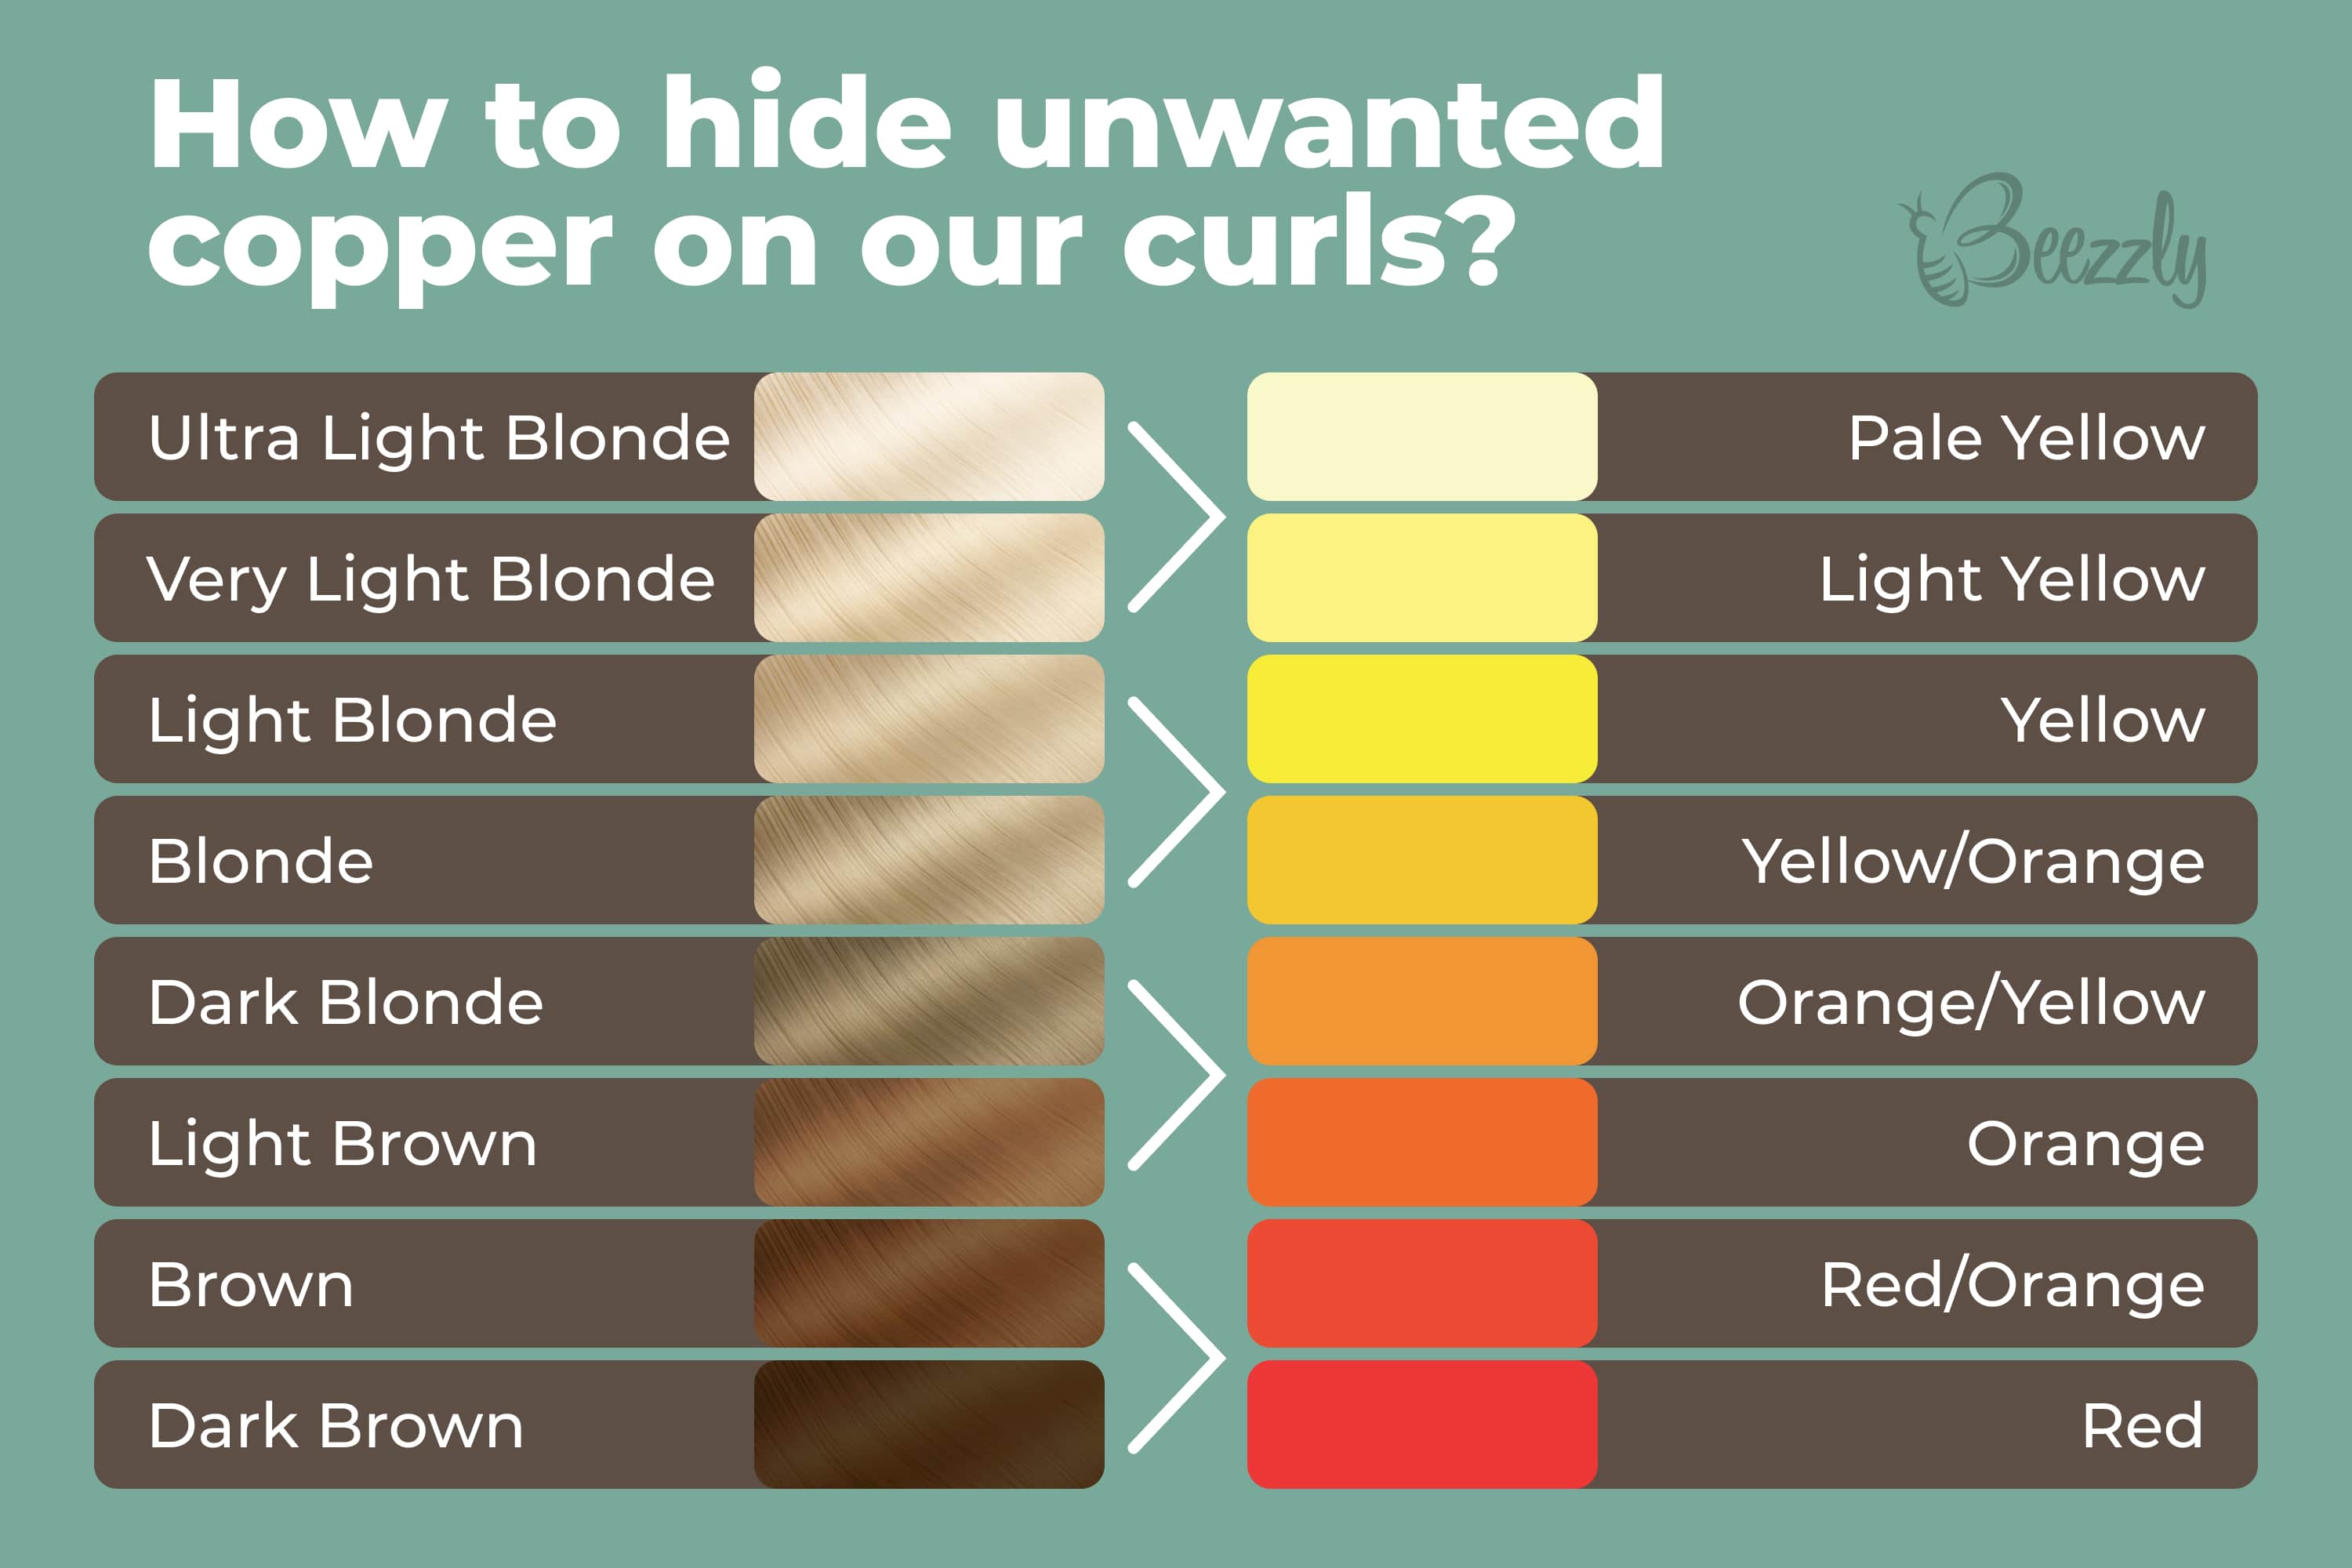 How to hide unwanted copper on our curls